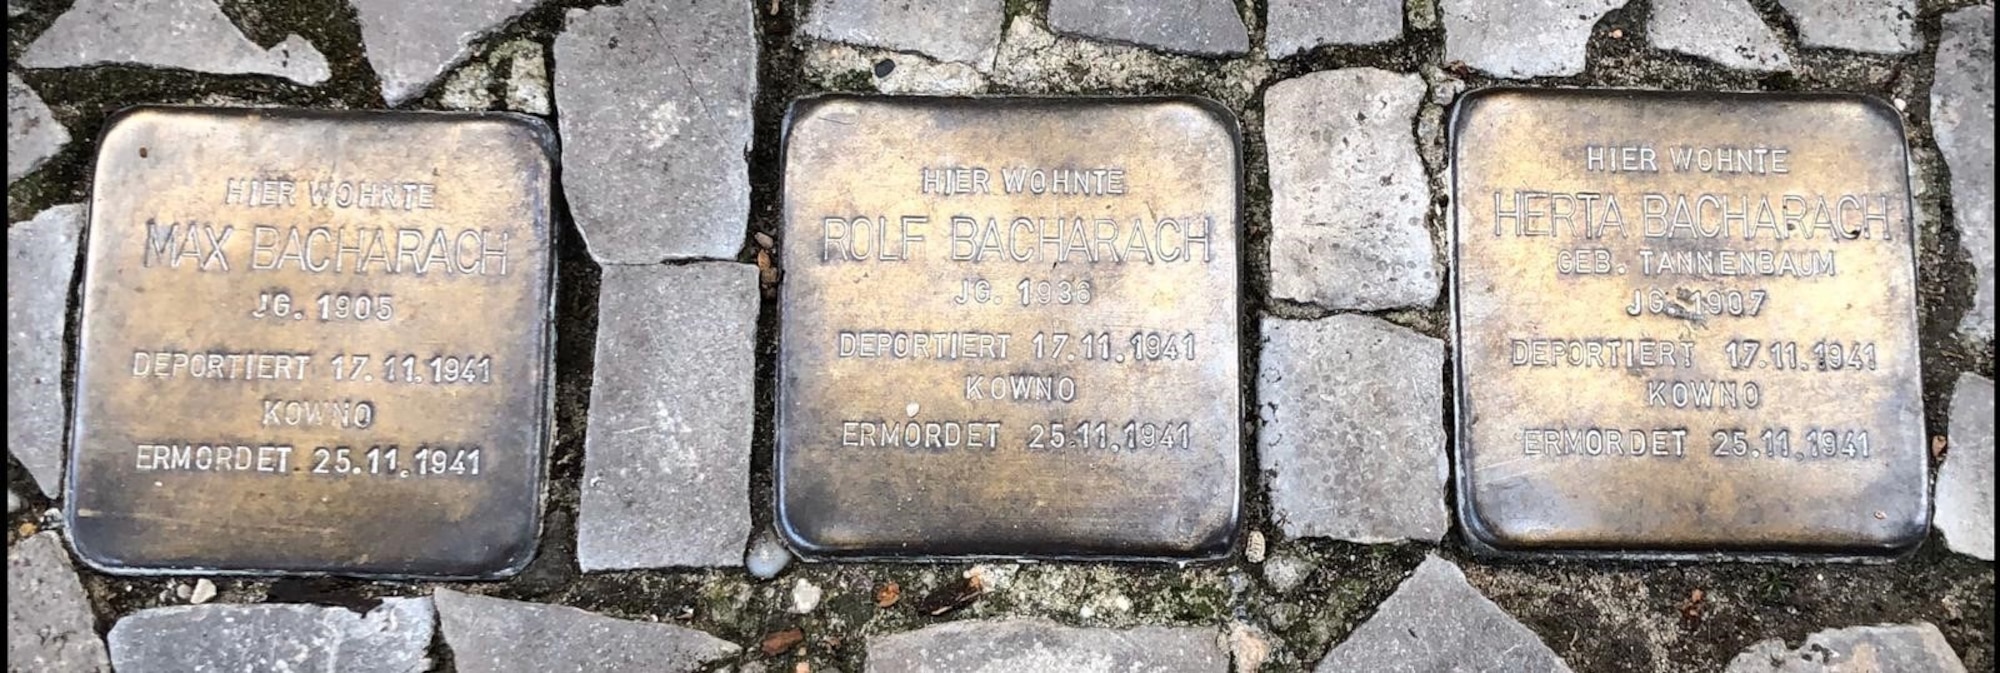 The Stolpersteine are mini memorials the victims of the Holocaust all around Germany. Each of the small monuments is engraved by hand without the use of mechanized processes. (Courtesy photo)